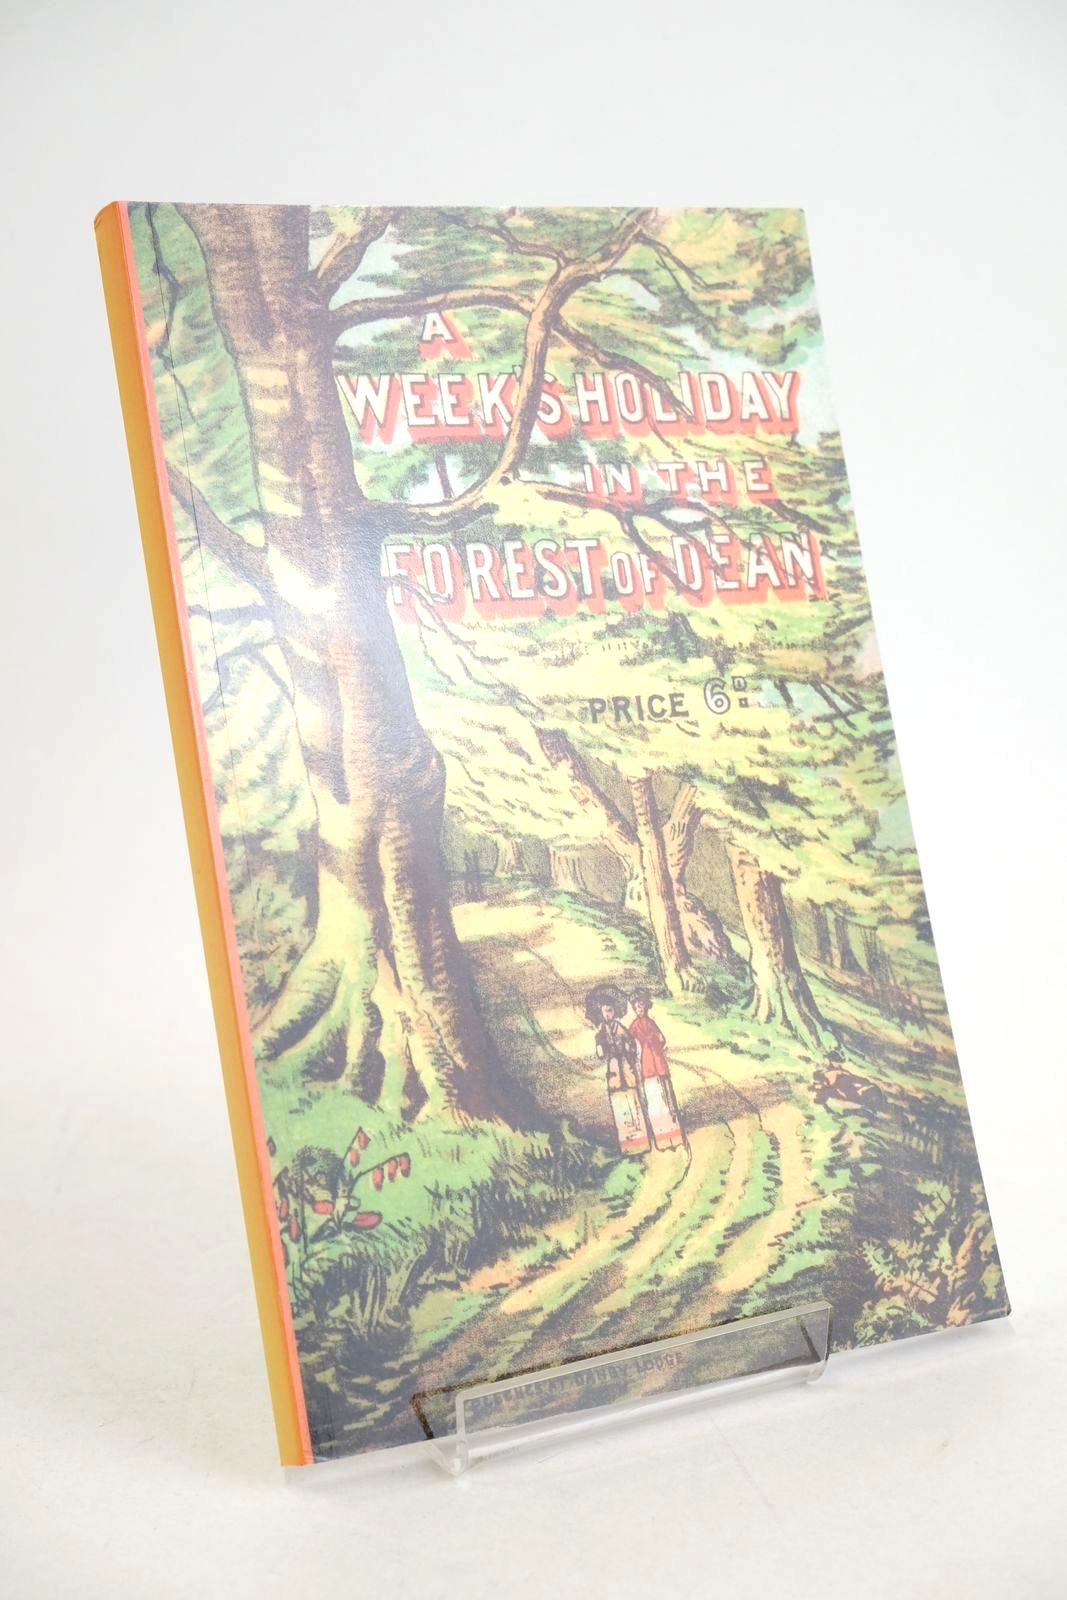 Photo of A WEEK'S HOLIDAY IN THE FOREST OF DEAN written by Bellows, John Standing, Ian published by Holborn House (STOCK CODE: 1327848)  for sale by Stella & Rose's Books